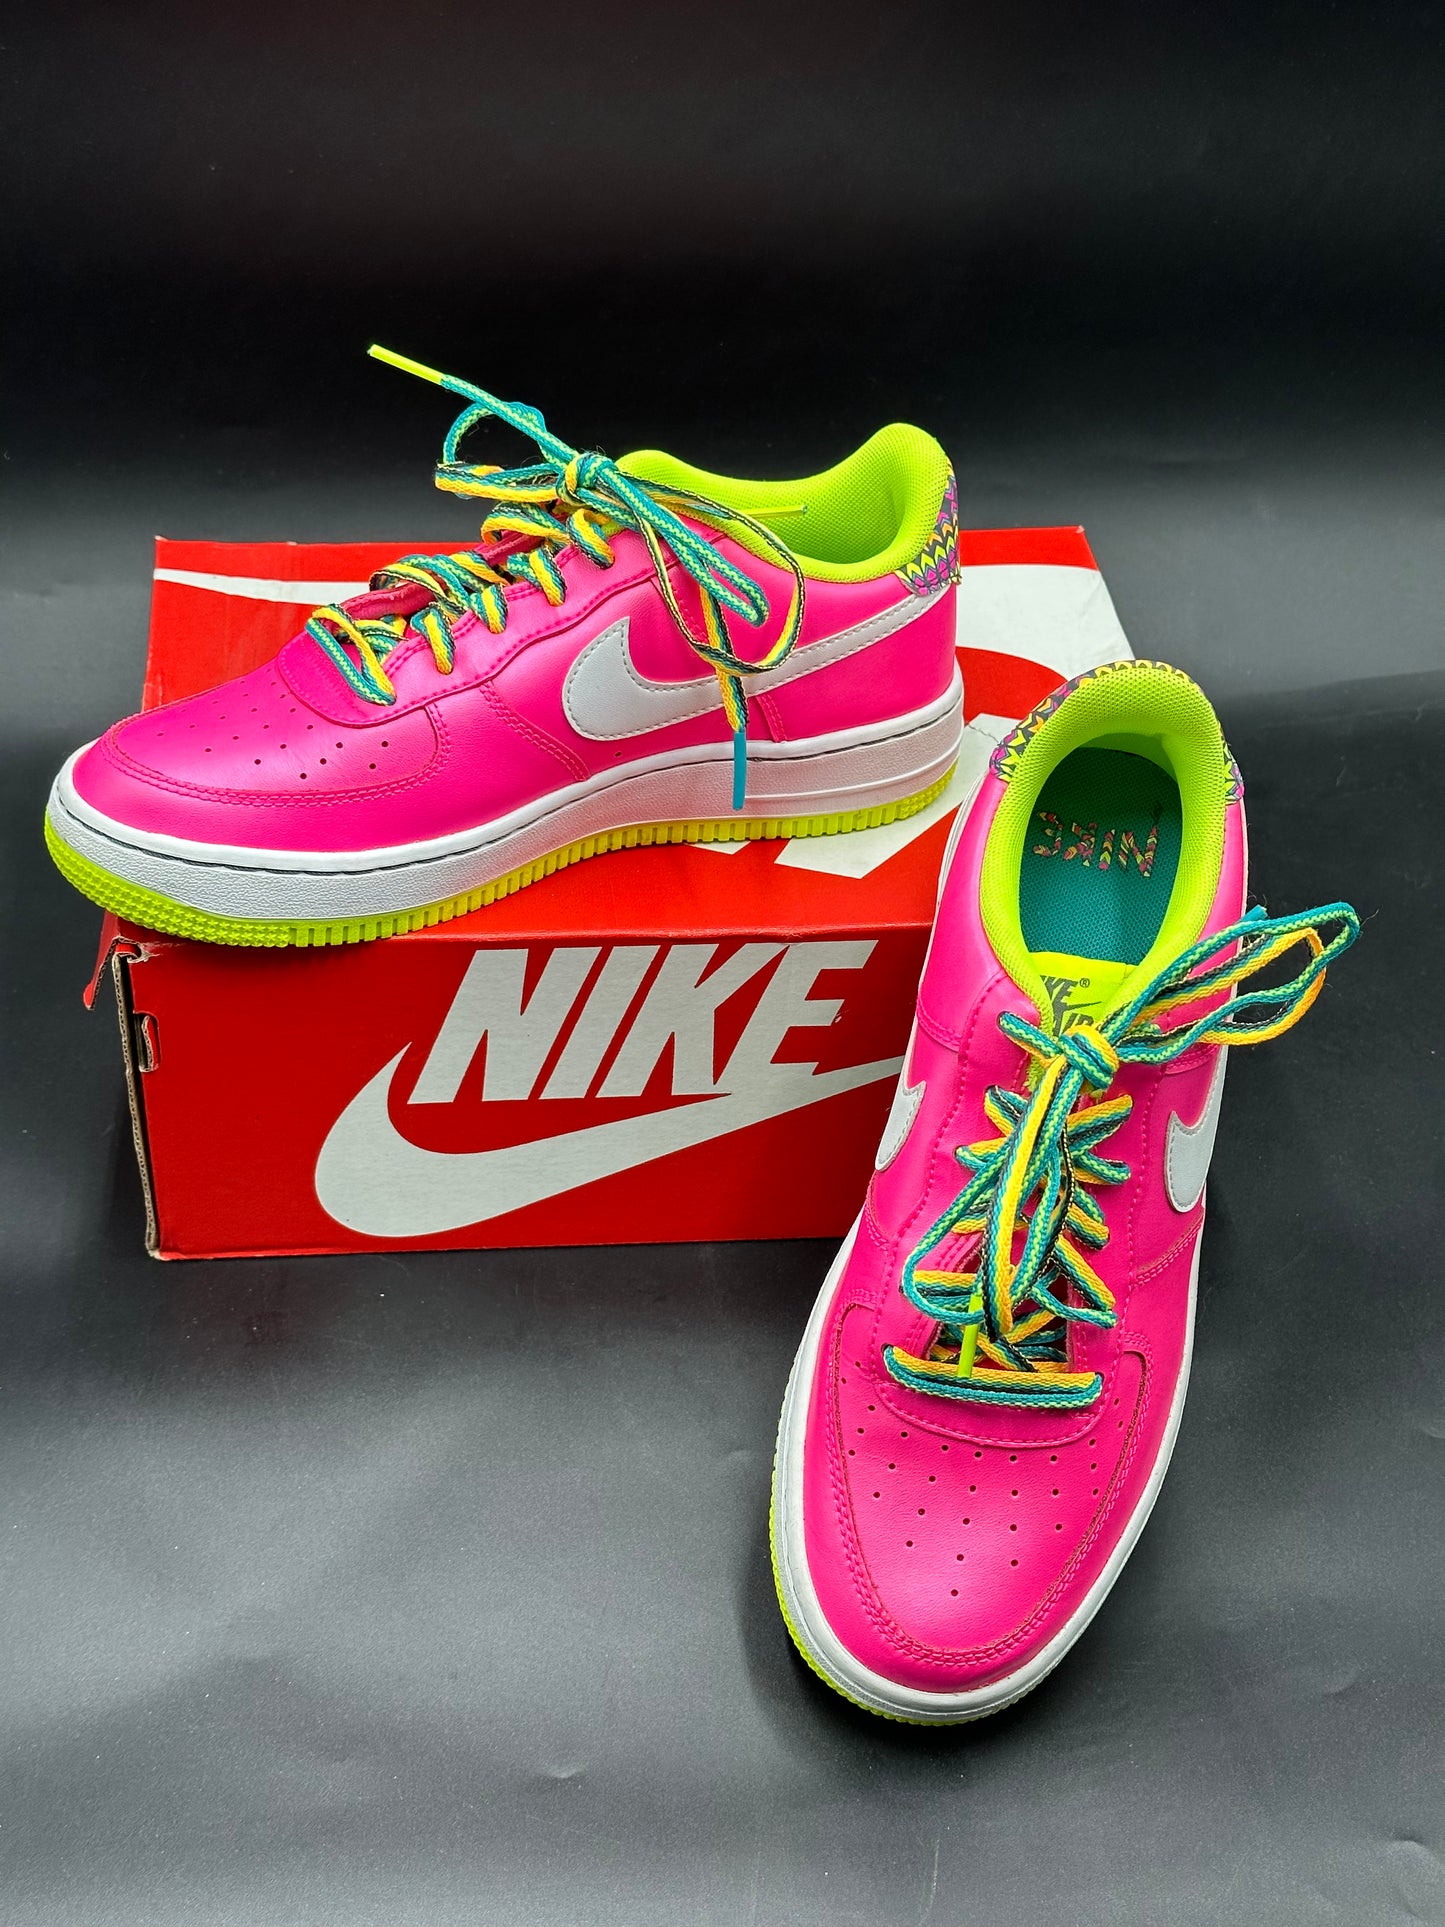 Woman’s Nike Air Force 1 Pink Blast Volt White Low Neon Sneaker Size 5.5.